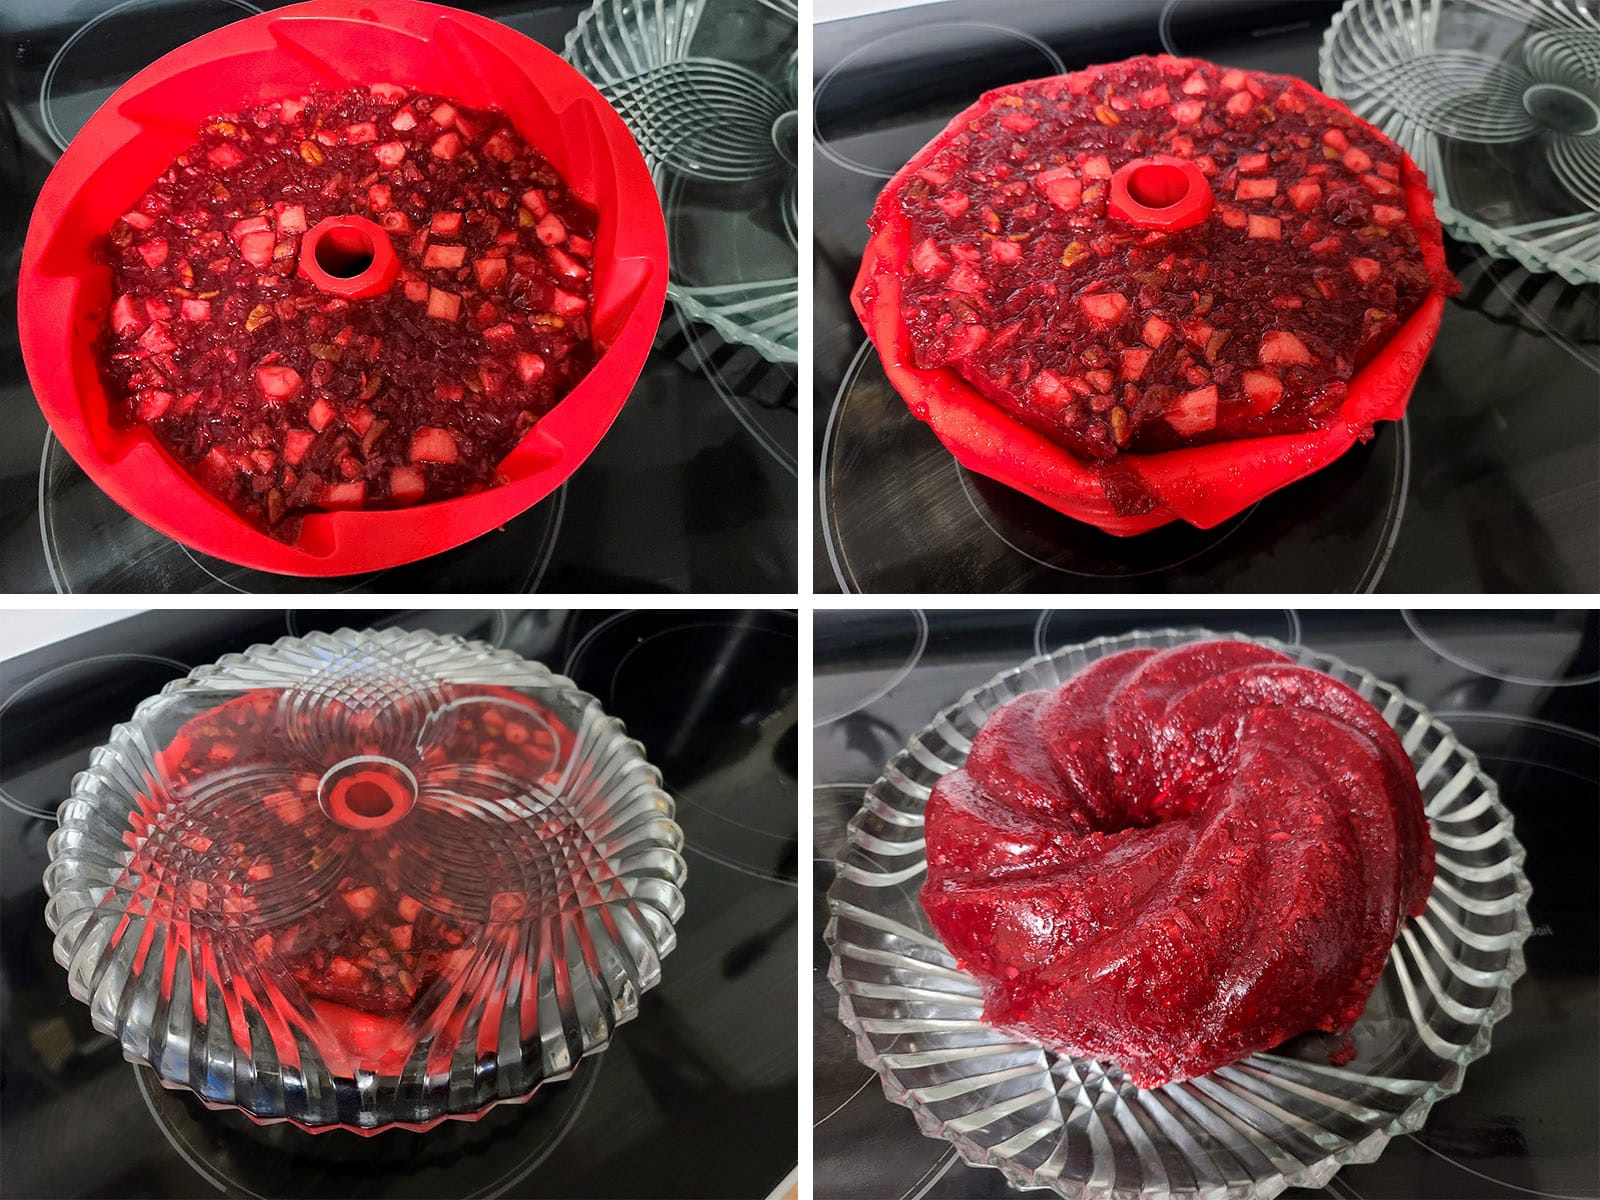 A 4 part image showing the Jello salad being unmolded onto a serving plate.